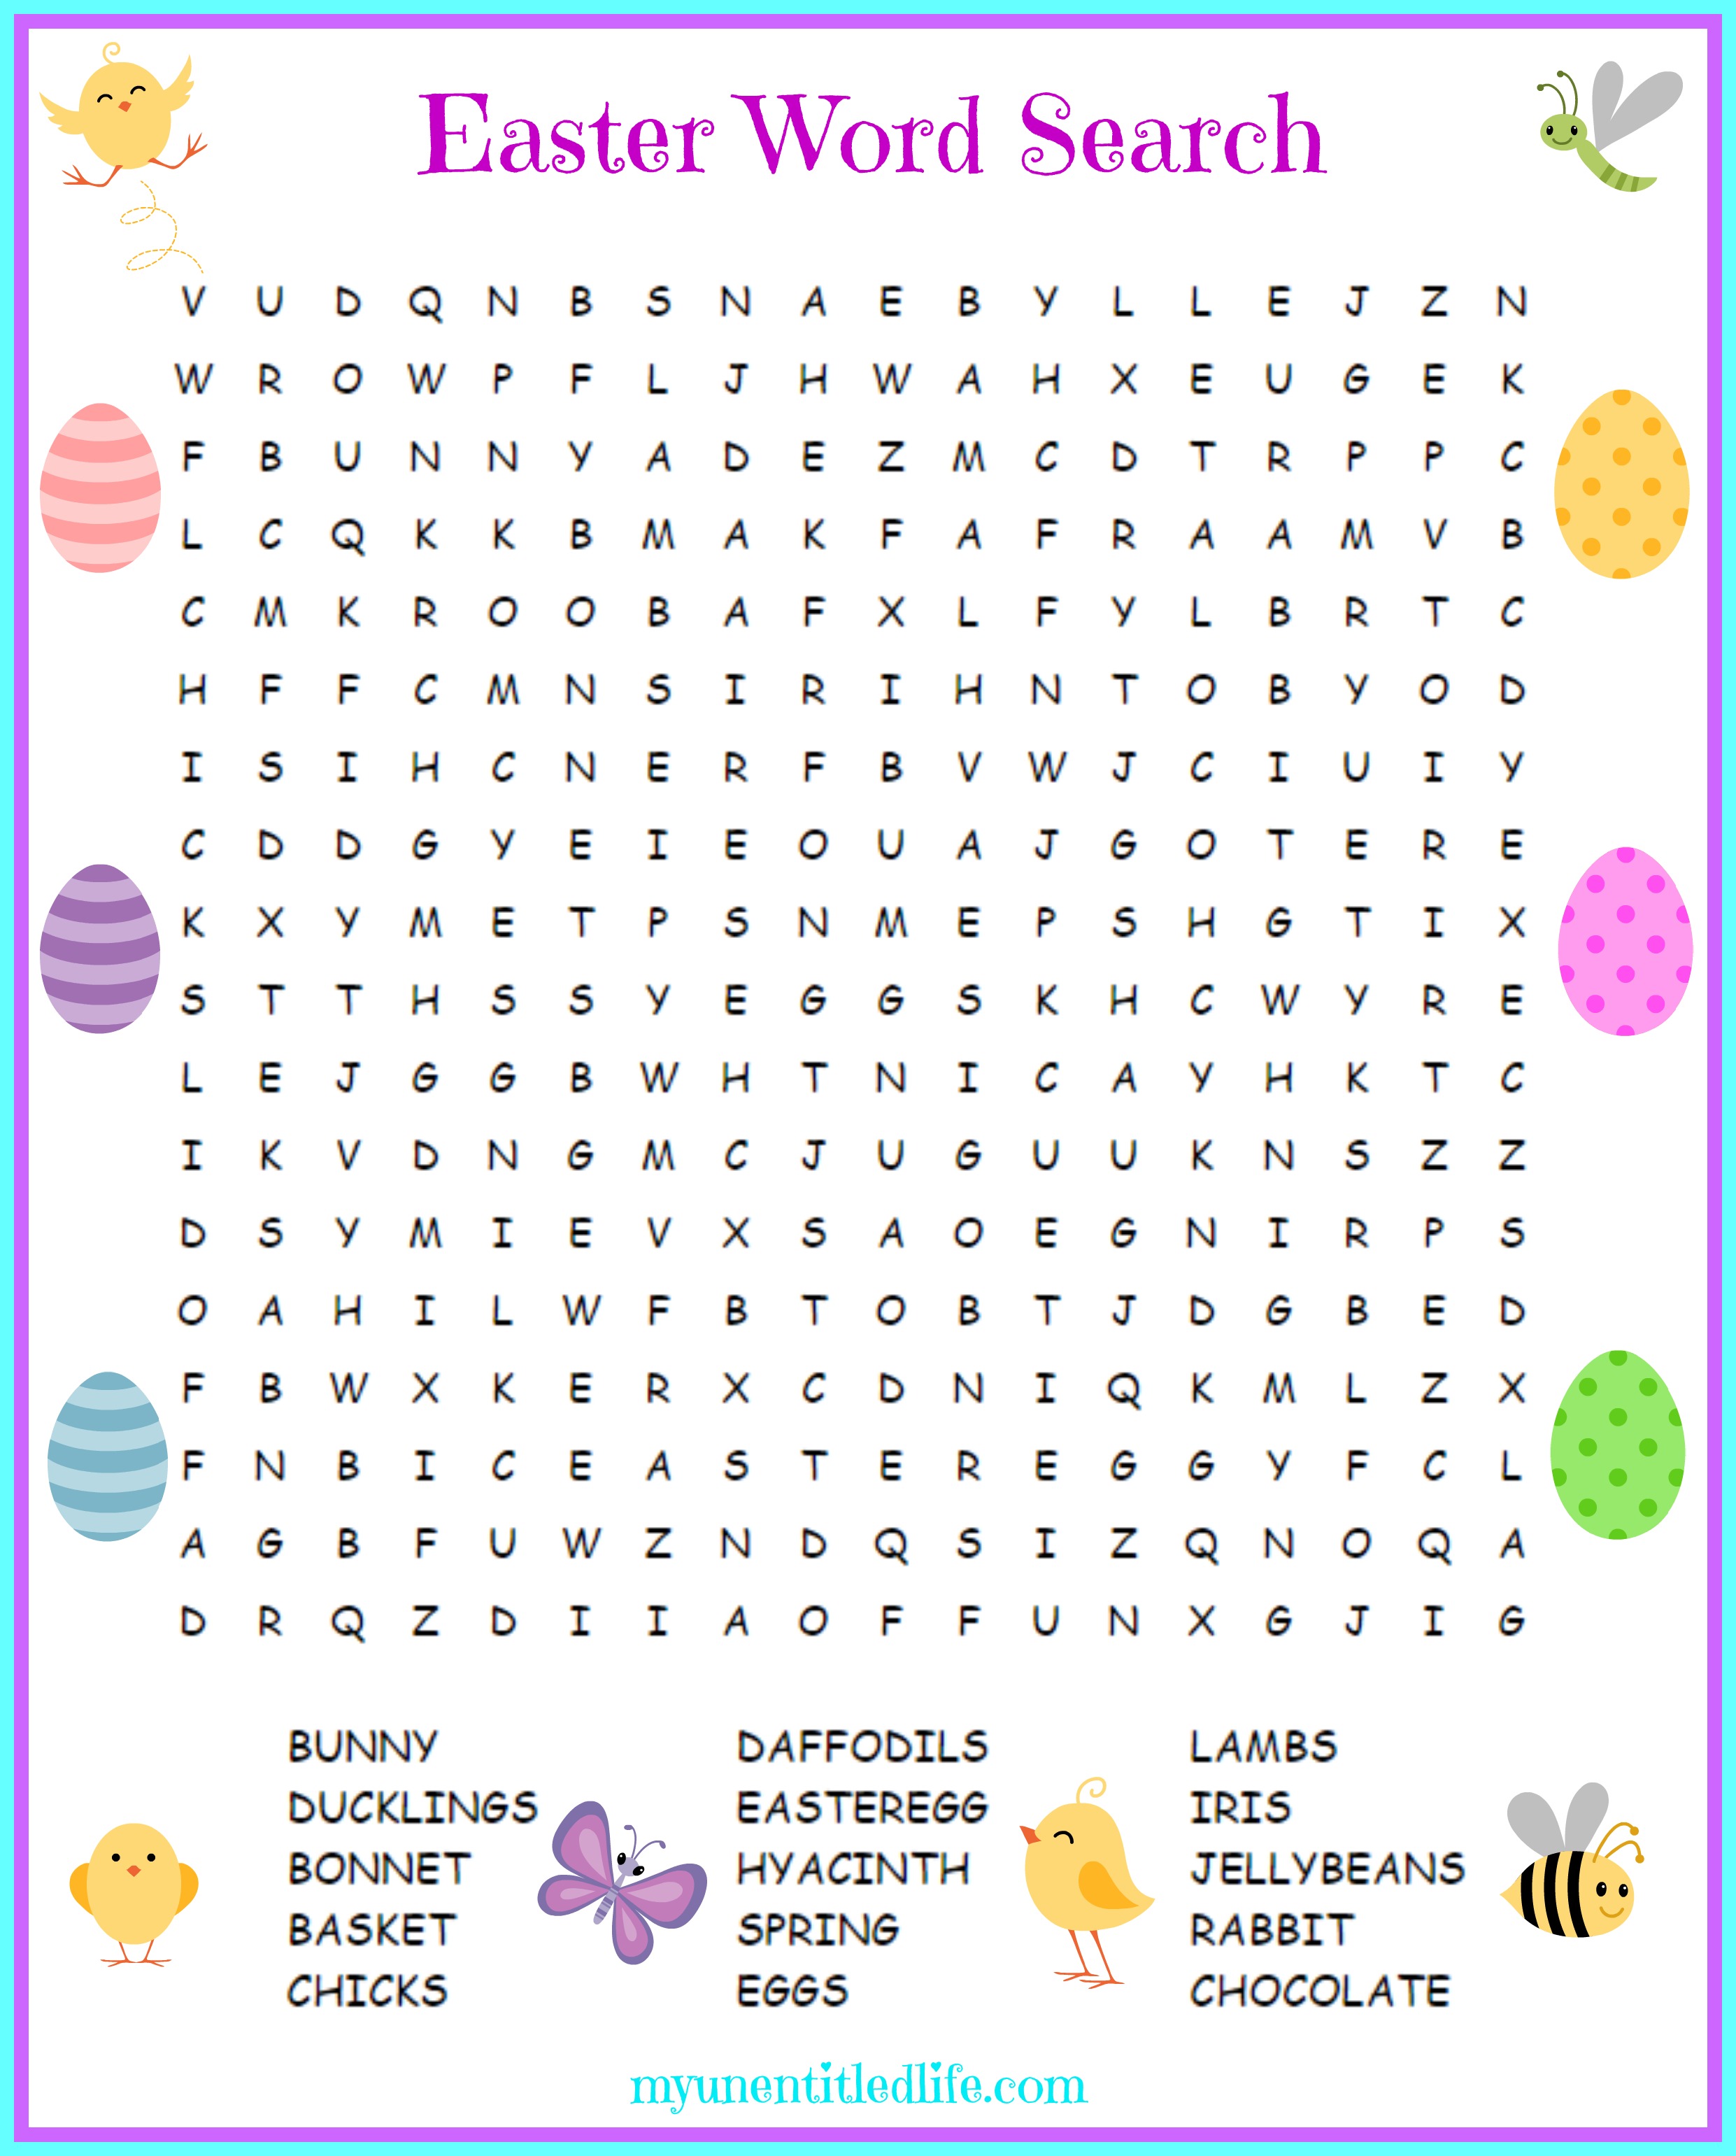 7 Best Images of Easter Word Search Printables Religious Easter Word